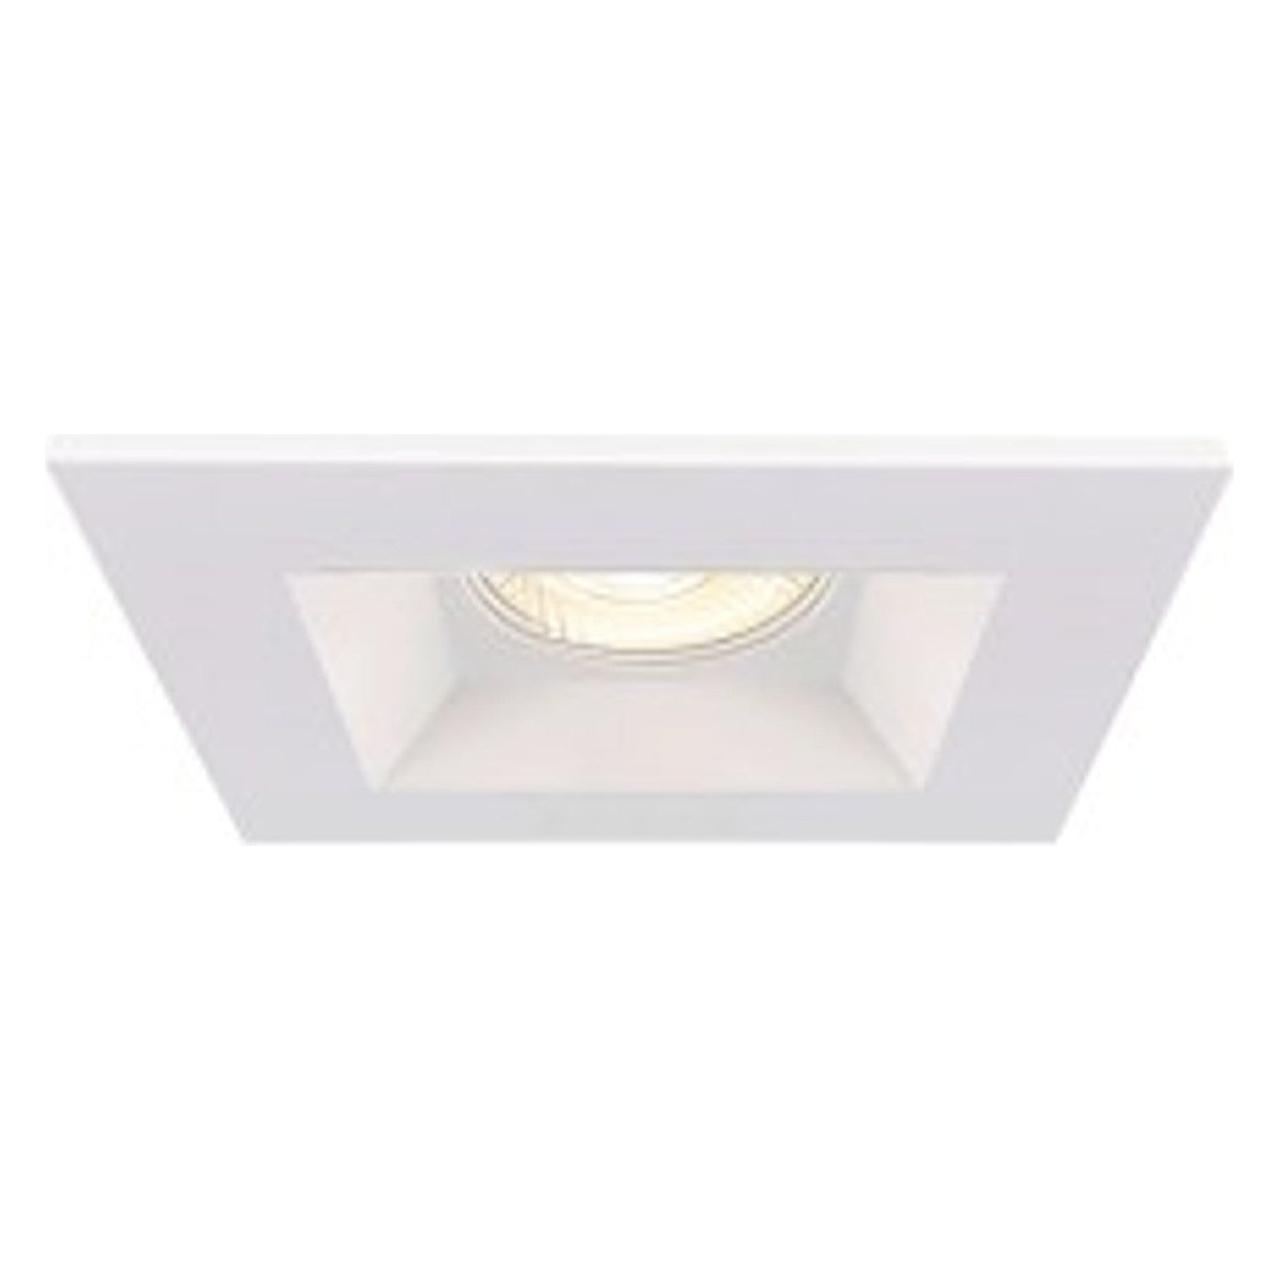 Midway 6" Square Fixed Downlight